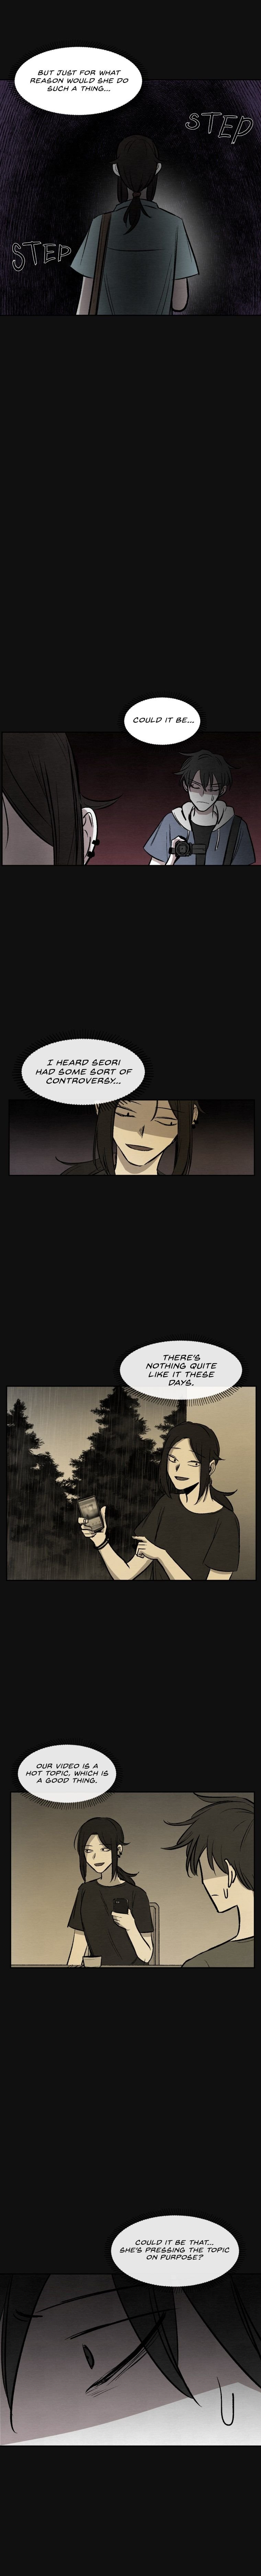 Devil’s Editing Chapter 13 - Page 8